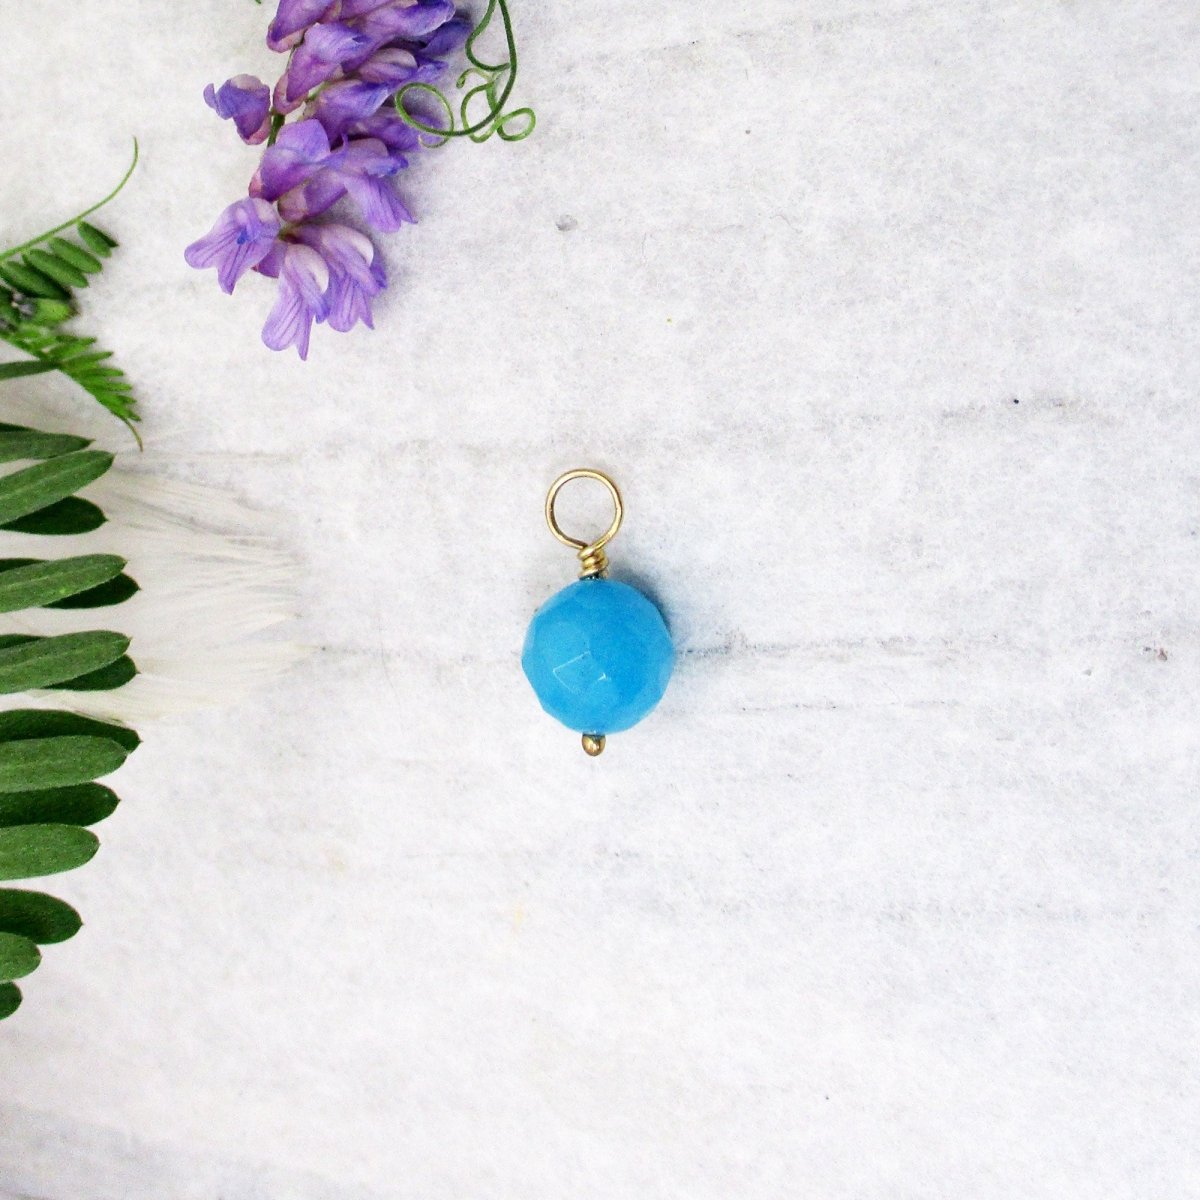 Caribbean Blue Turquoise Quartz Bead Wrap Charm in Solid Gold or Silver - Luxe Design Jewellery